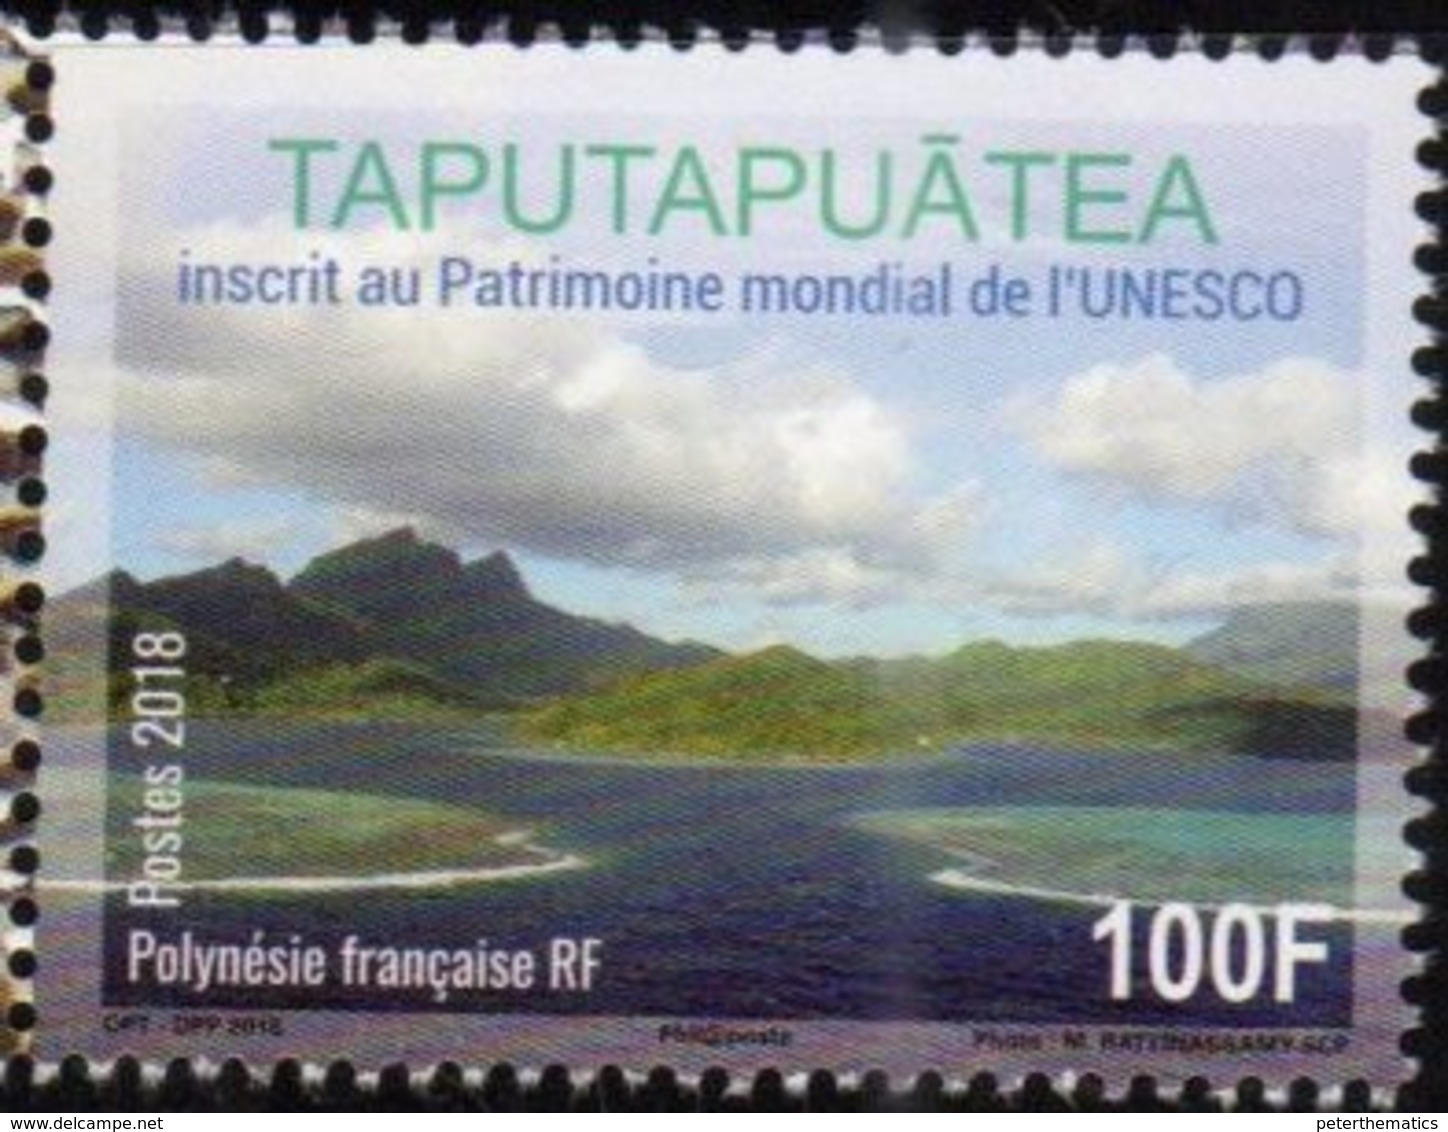 FRENCH POLYNESIA, 2018, MNH, TAPUTAPUATEA, MOUNTAINS, LANDSCAPES, UNESCO WORLD HERITAGE SITES, 1v - Géographie